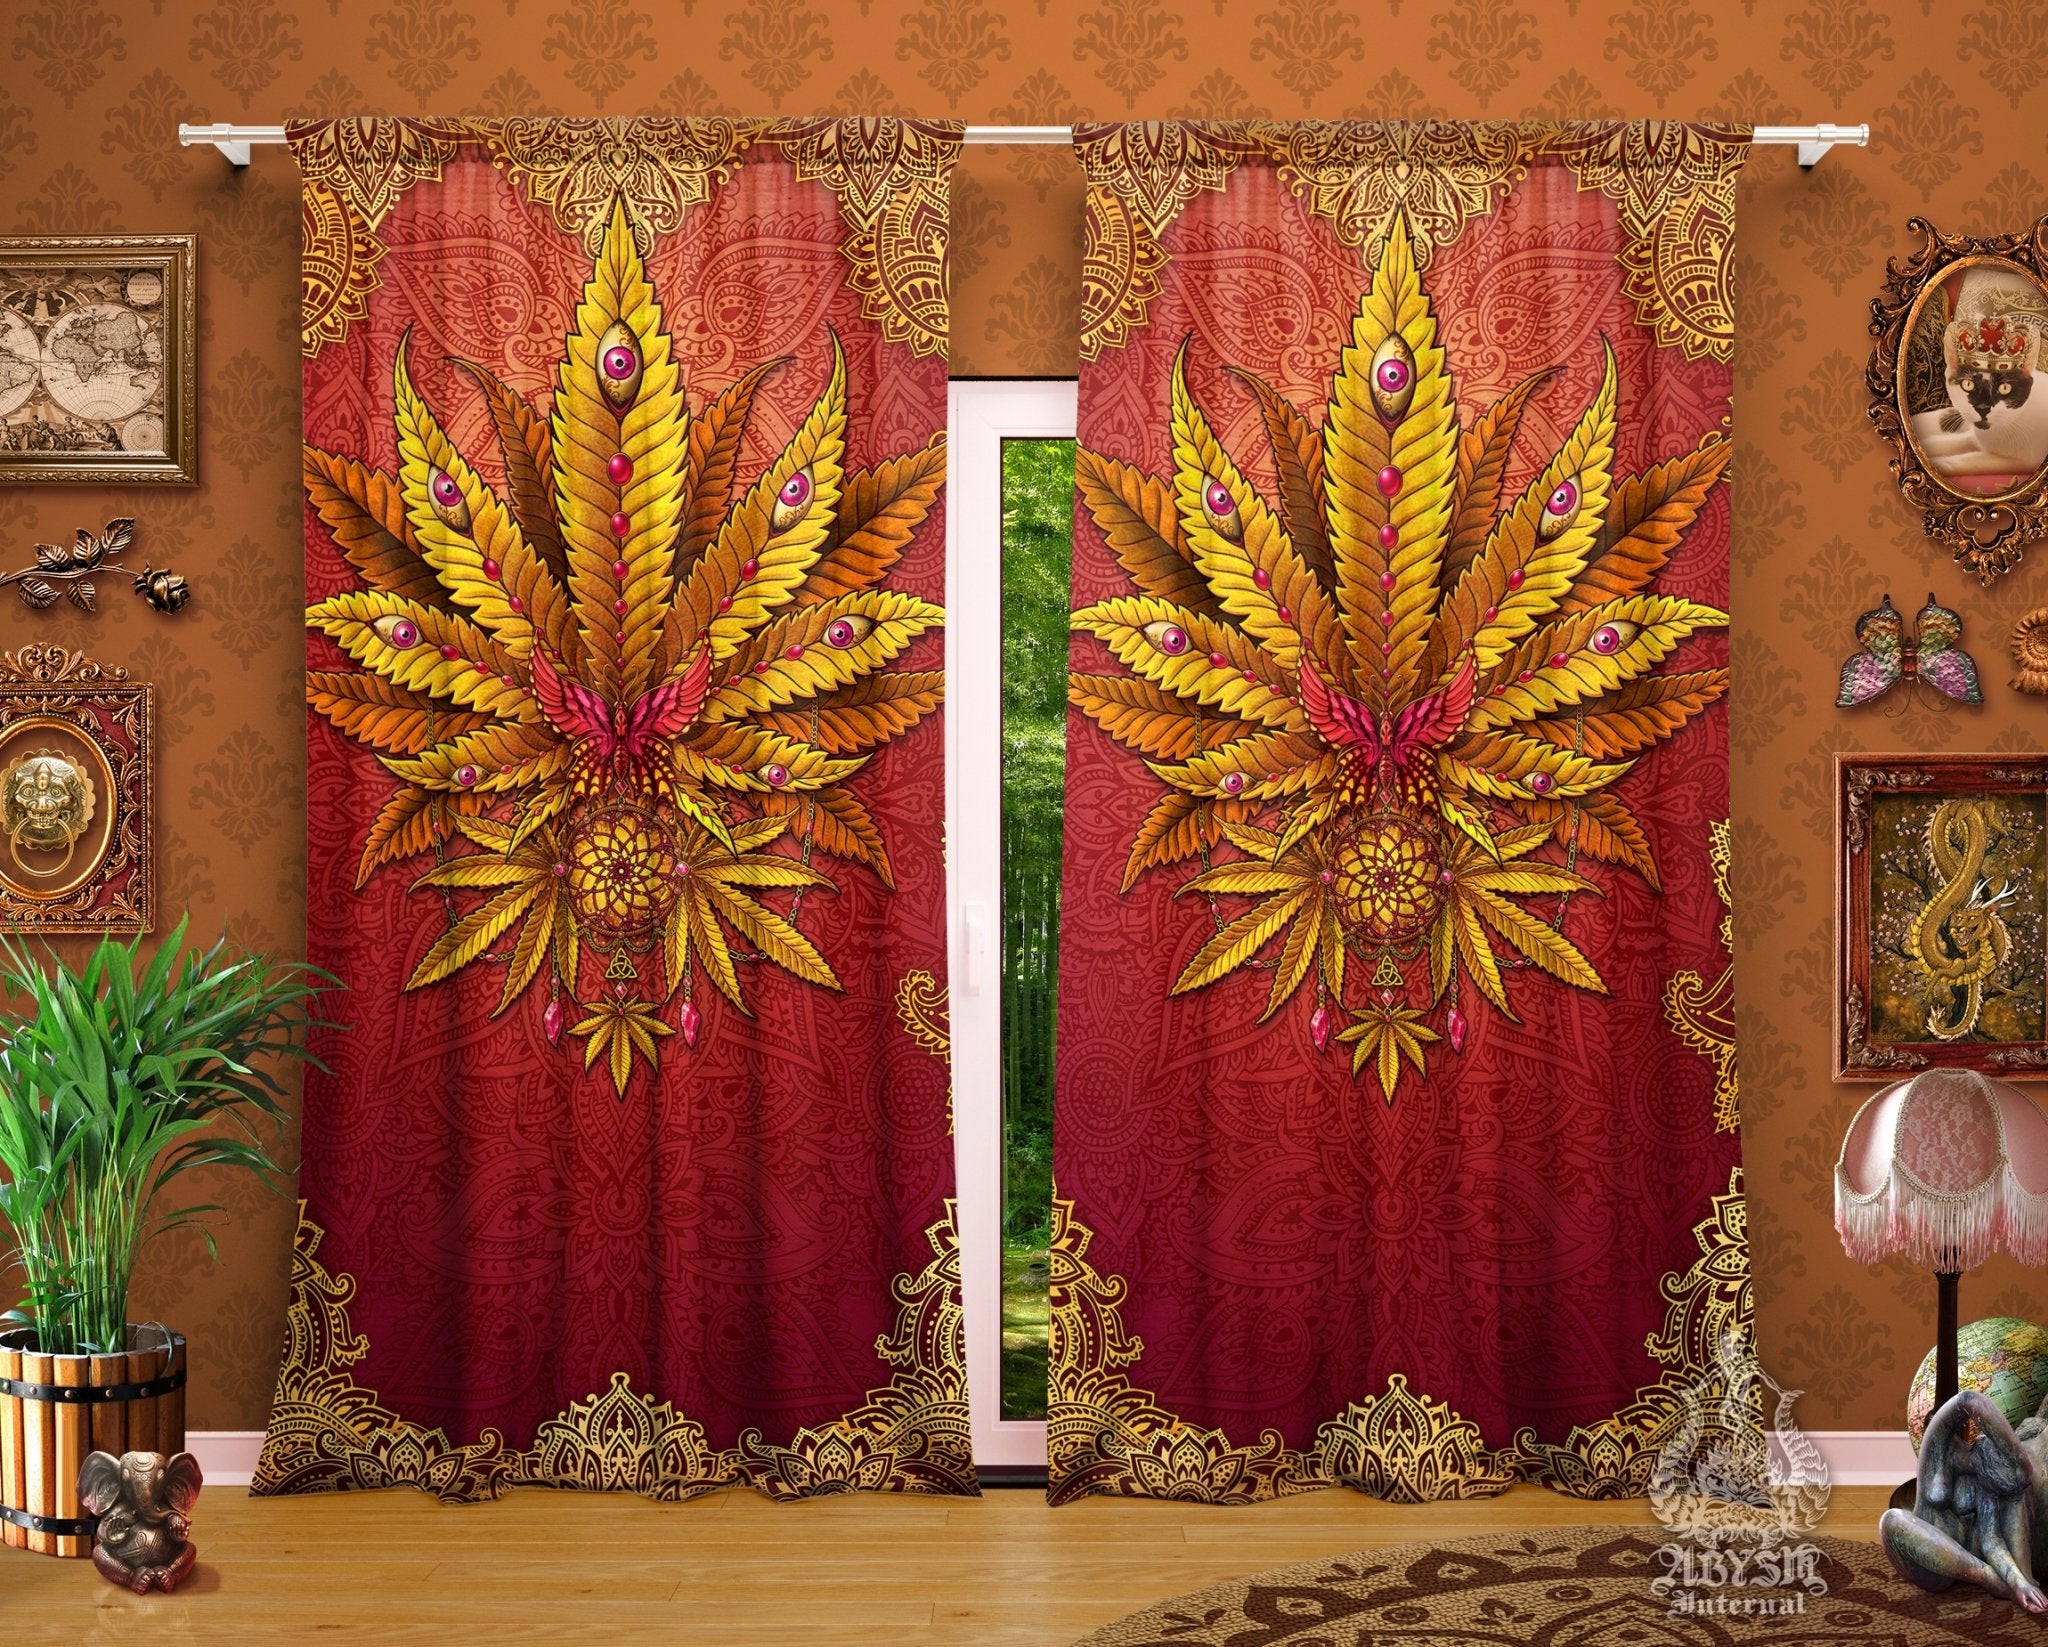 Weed Blackout Curtains, Cannabis Home and Shop Decor, Long Window Panels, Indie Hippie Print, 420 Room Art - Boho and Mandalas - Abysm Internal